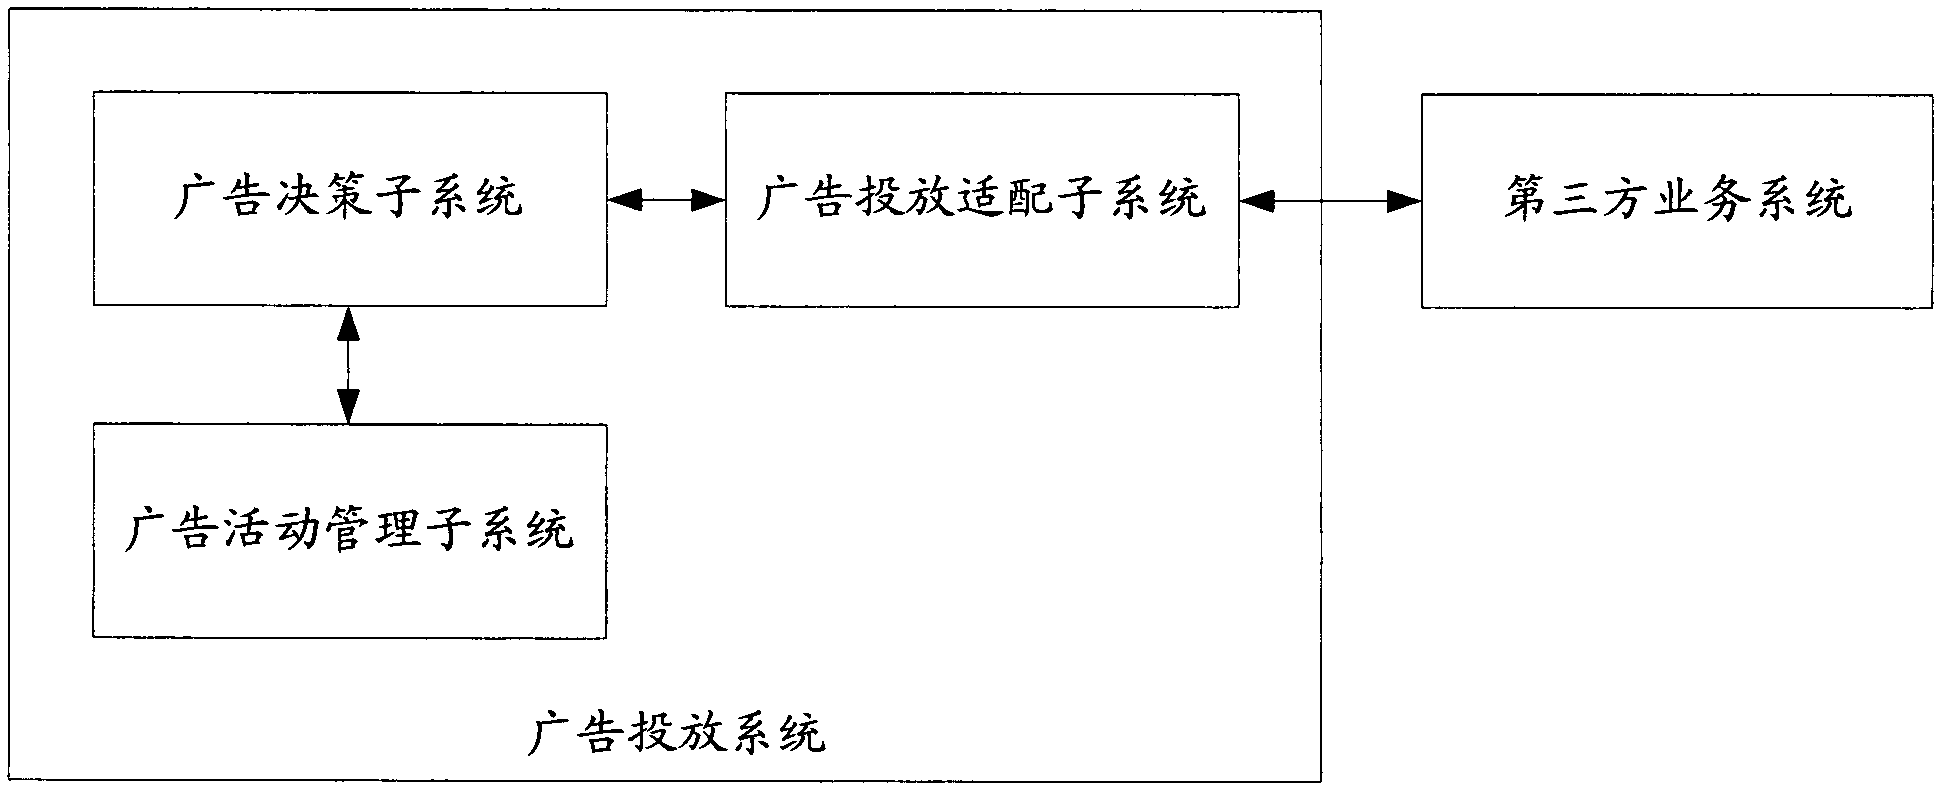 Advertising system and method